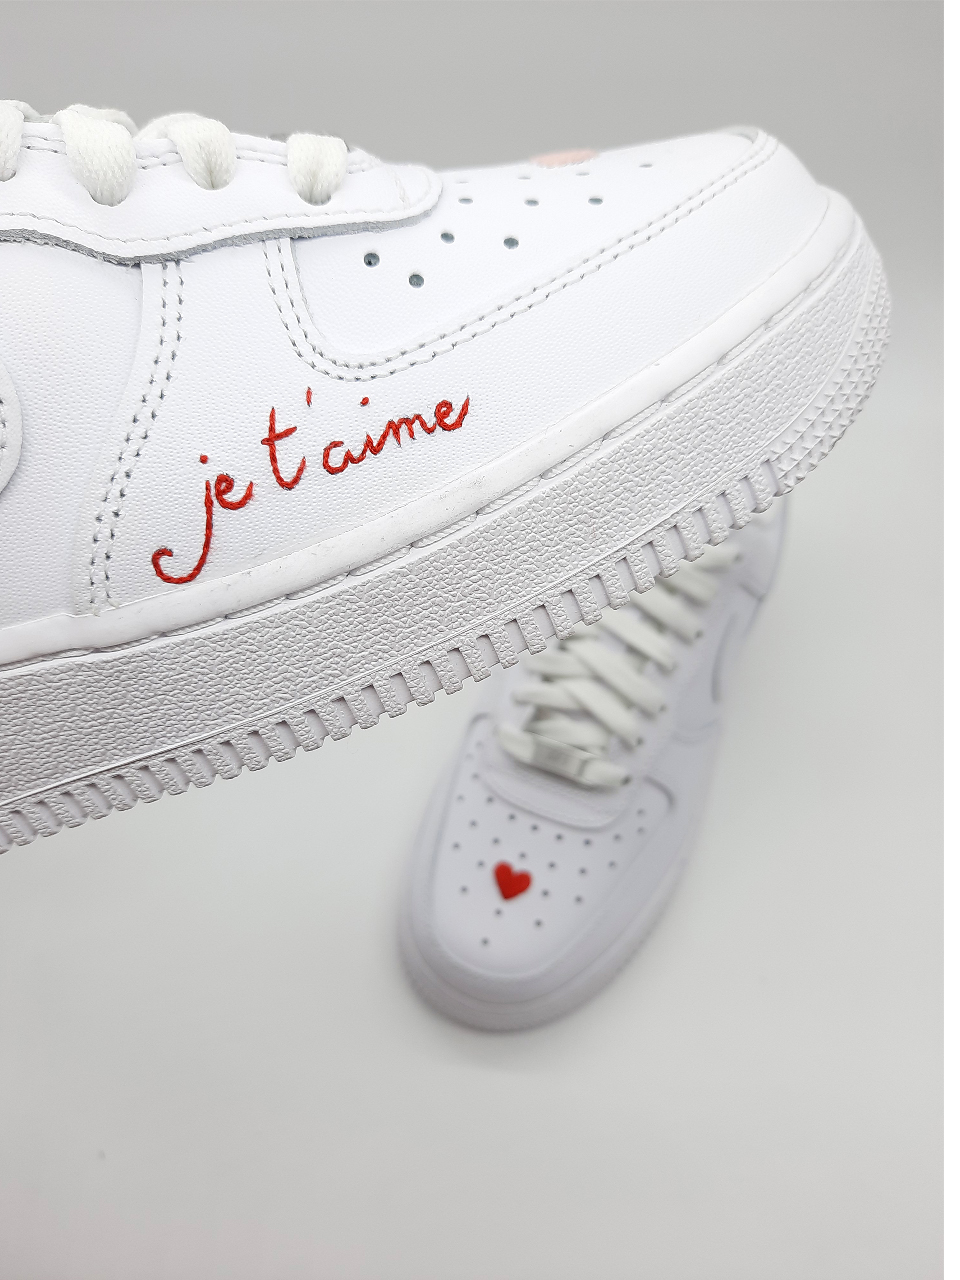 Broderie phrase "Je t'aime" sur sneakers Nike Air Force 1